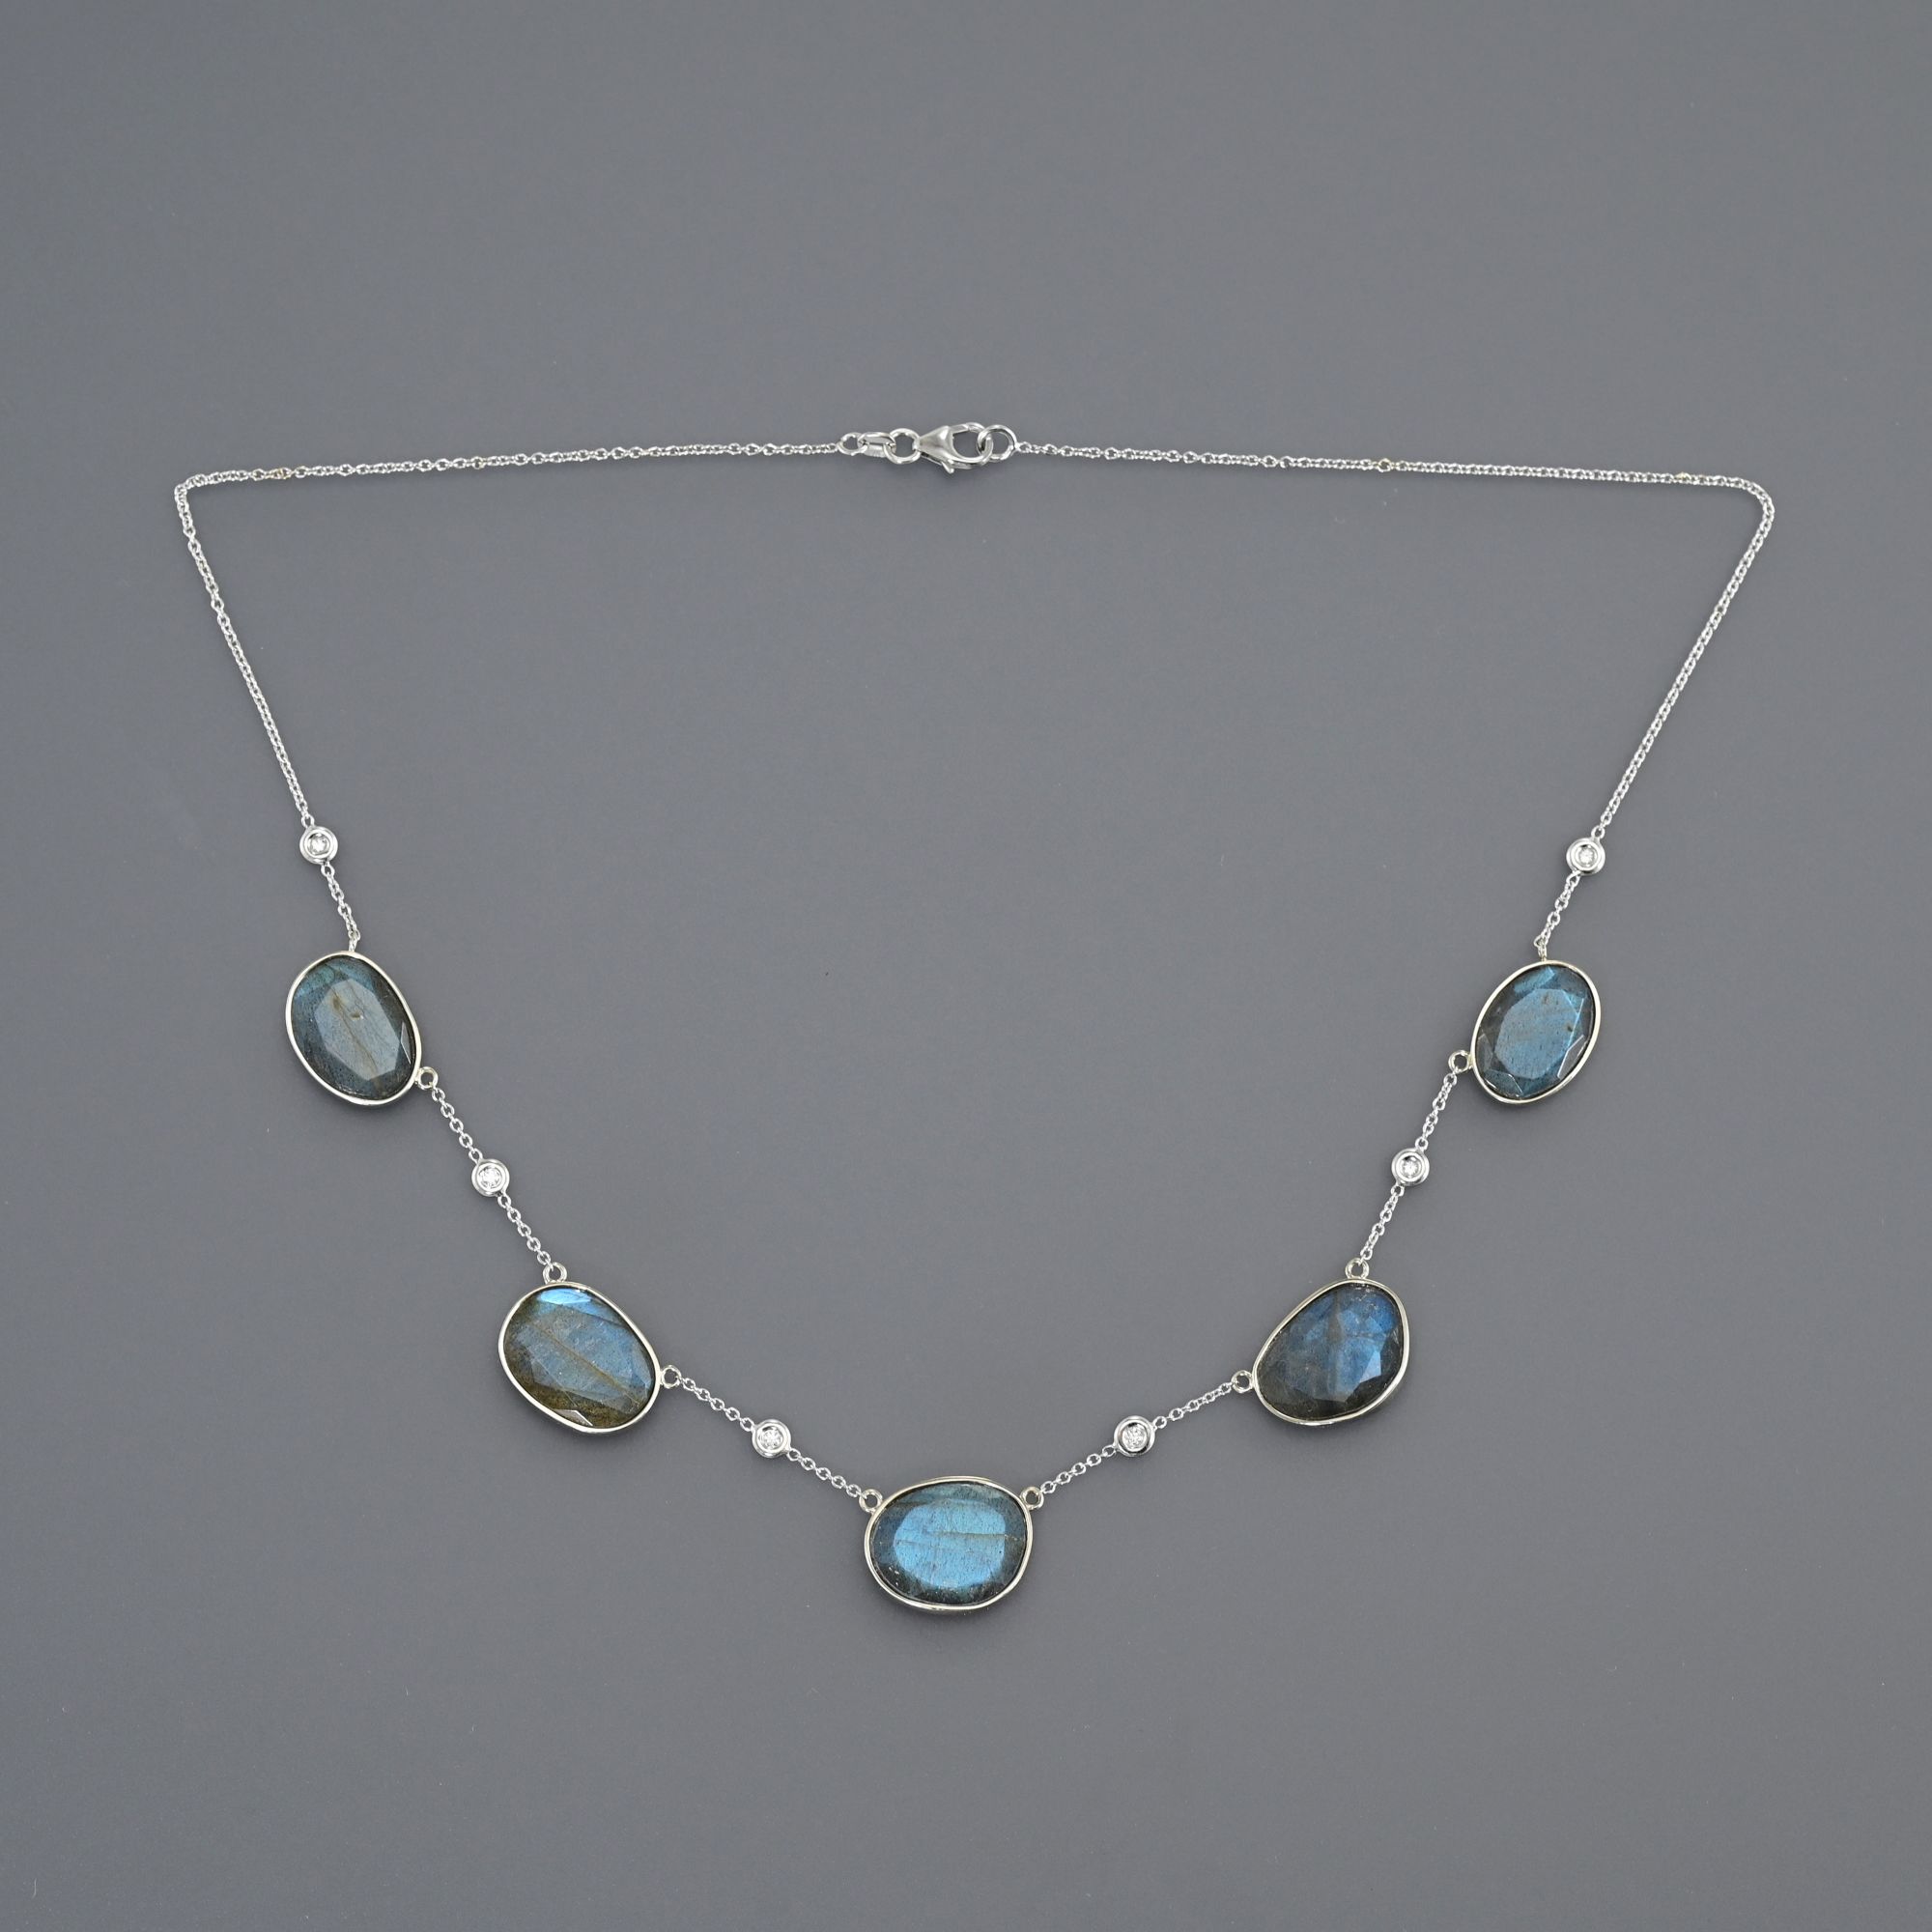 18k white gold chain necklace with Labradorite and floating Diamonds